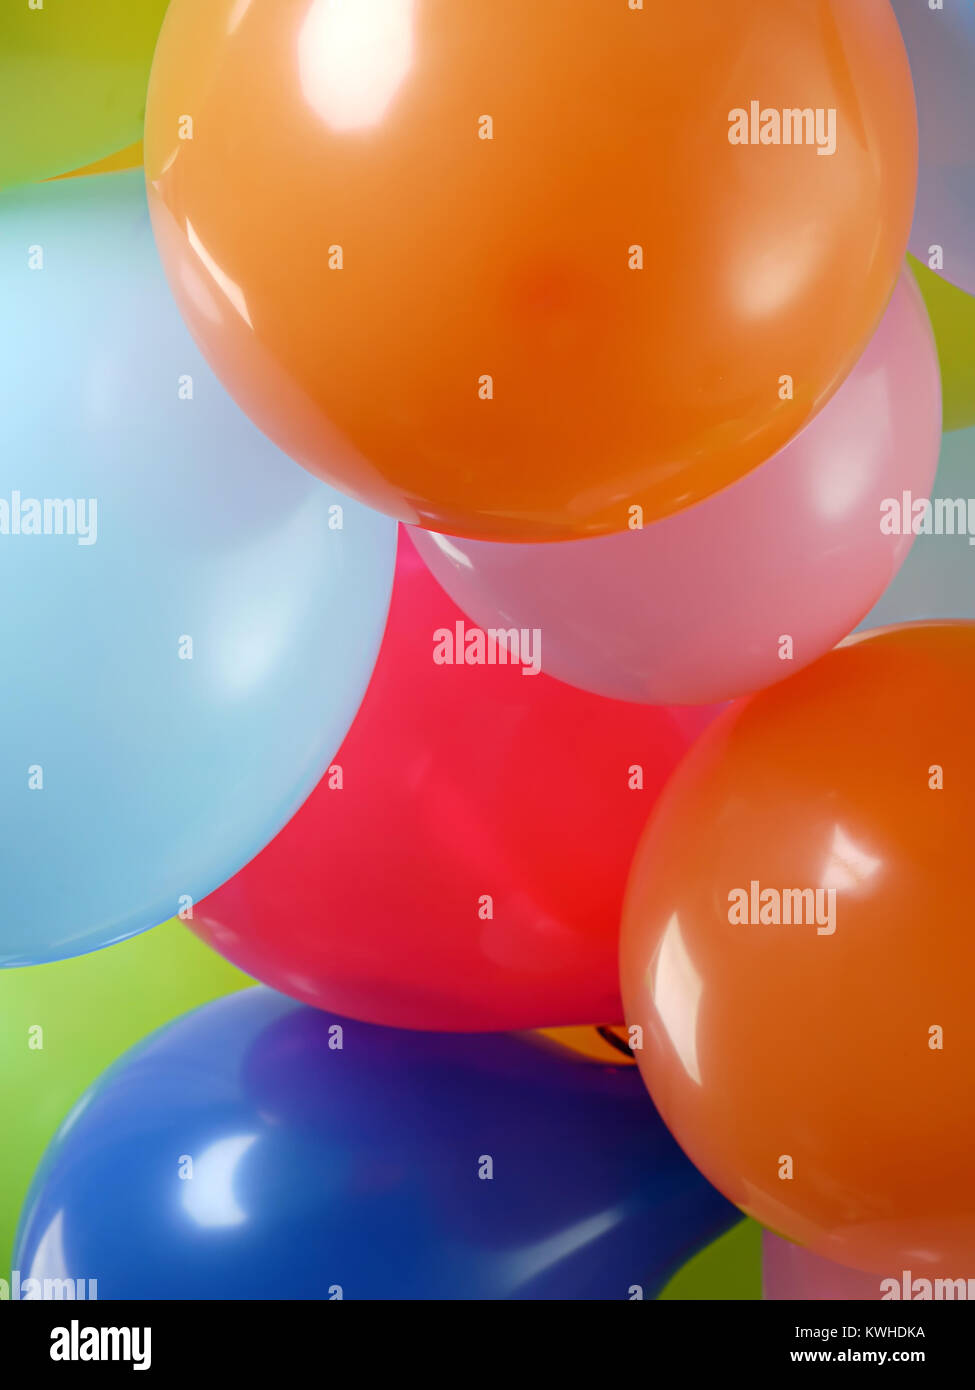 Background of colorful party balloons Stock Photo